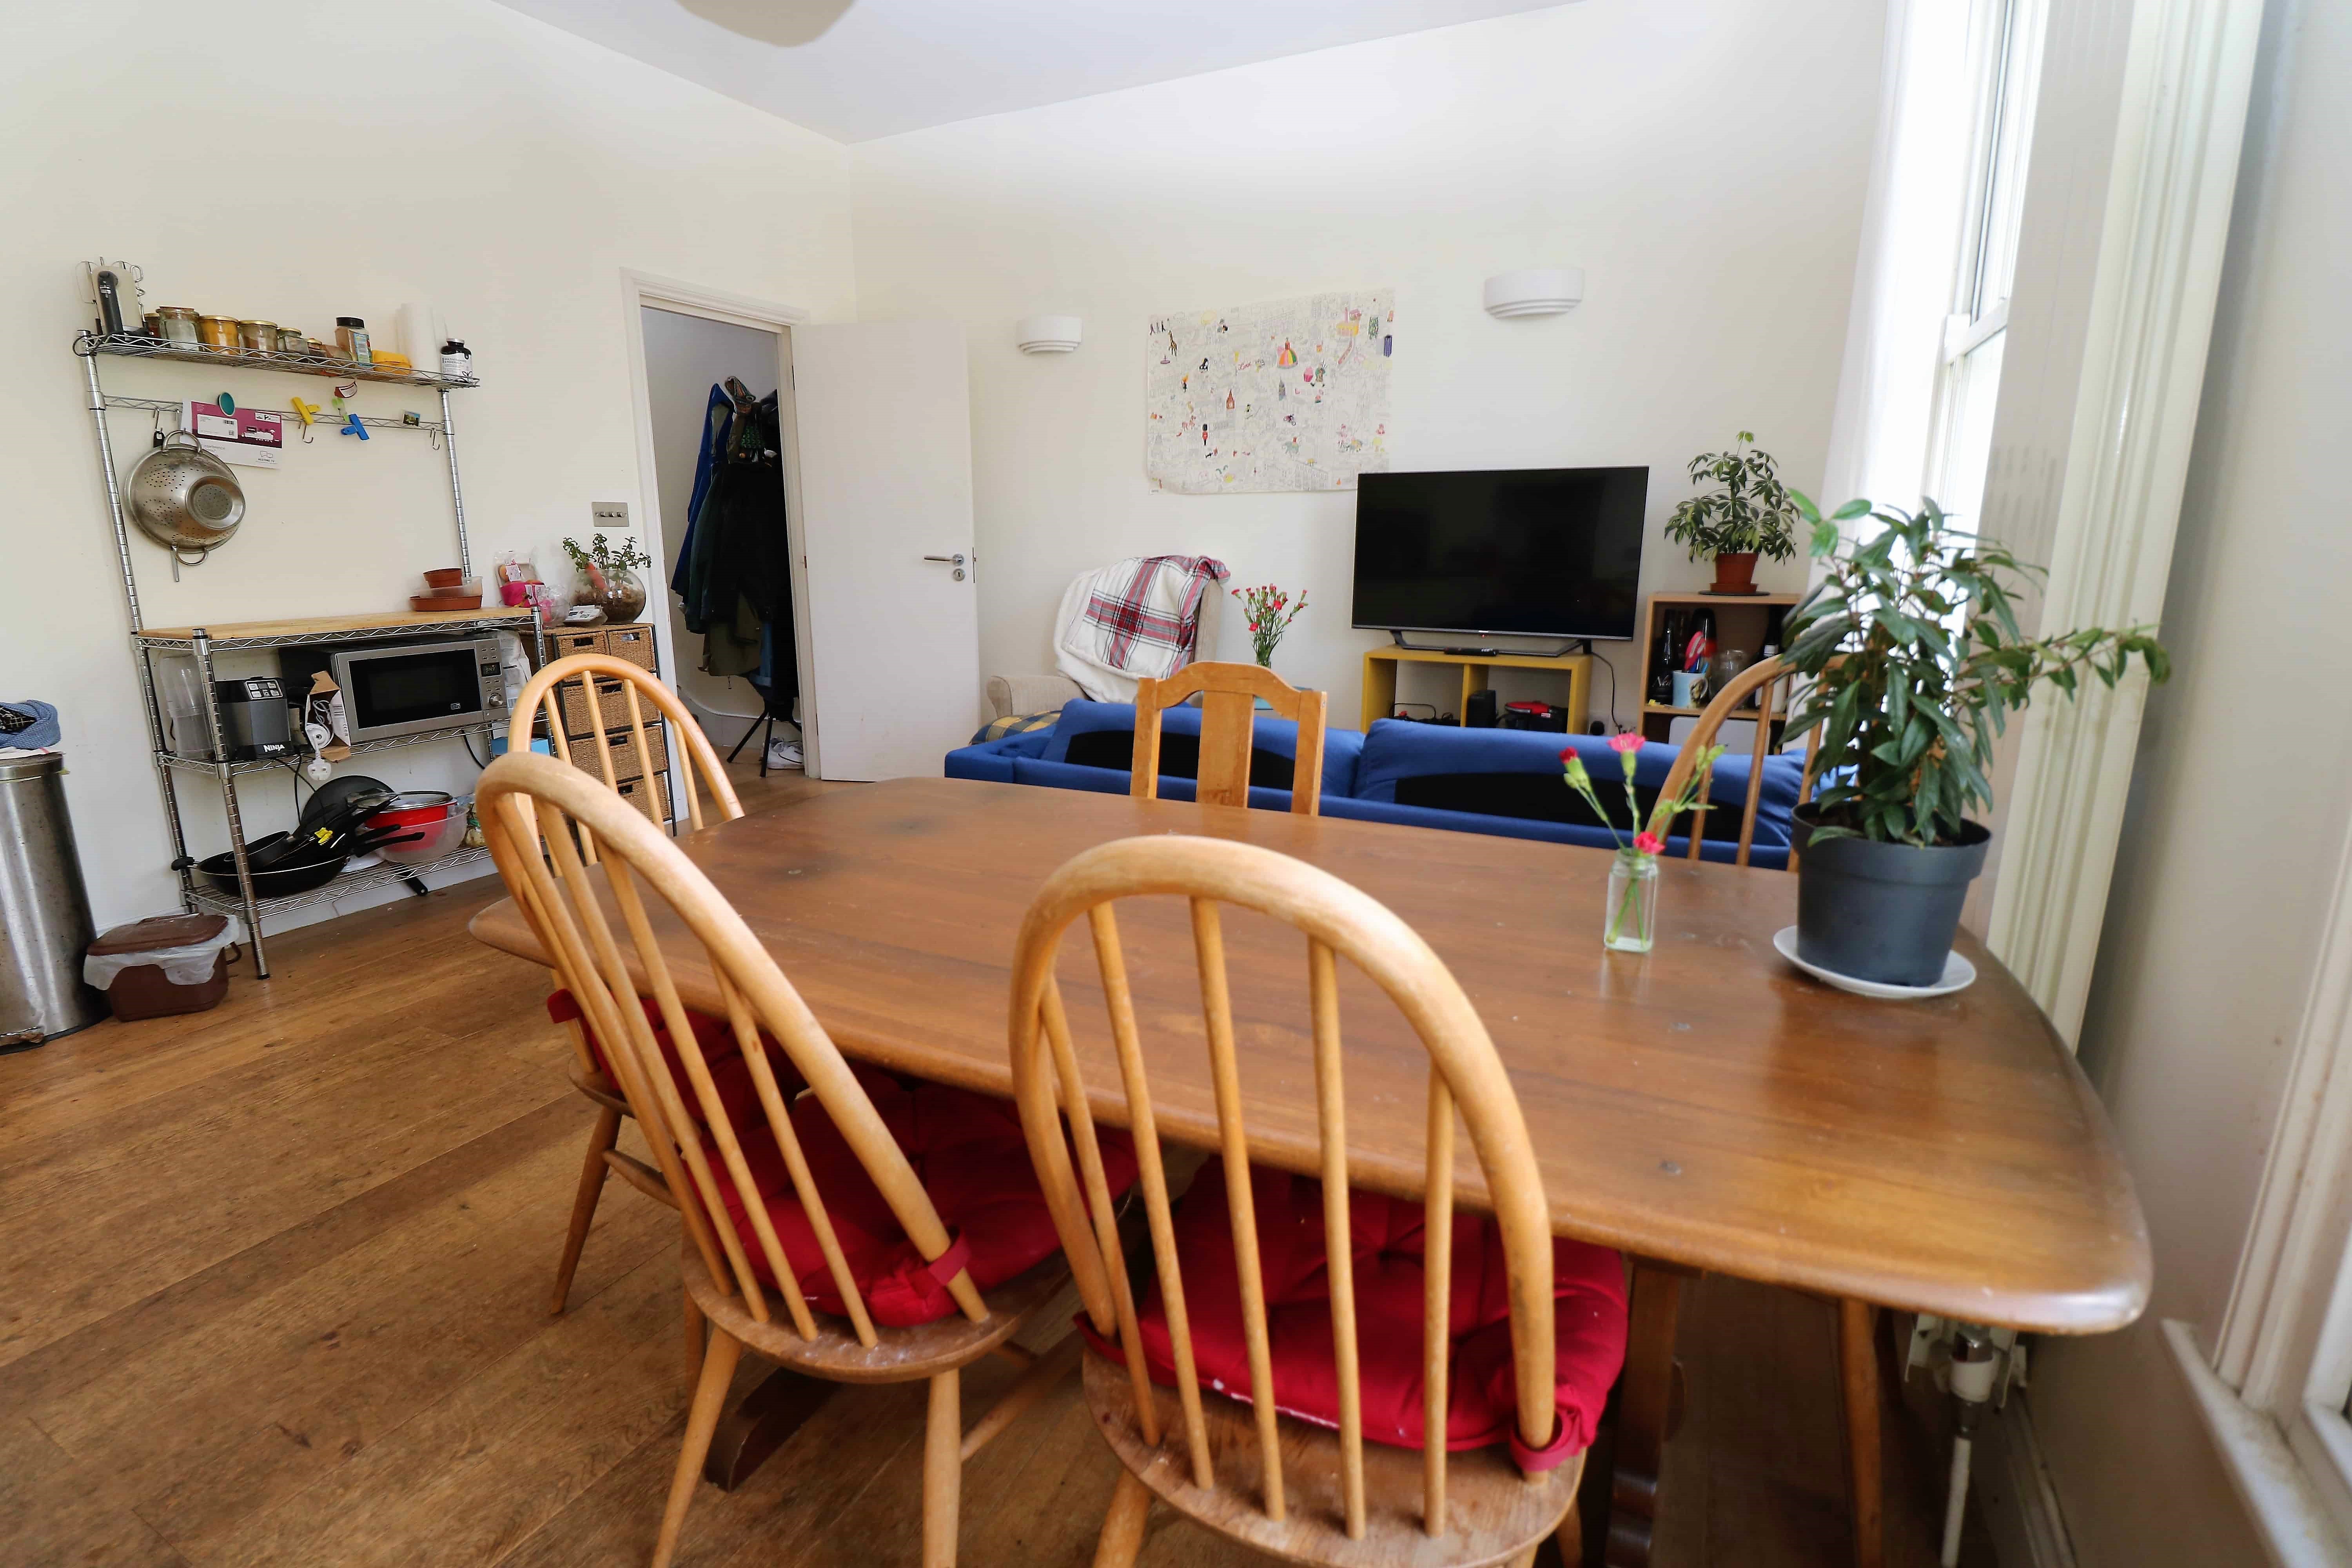 Spacious split level 3 double bedroom flat in N4 Islington with a superb roof terrace